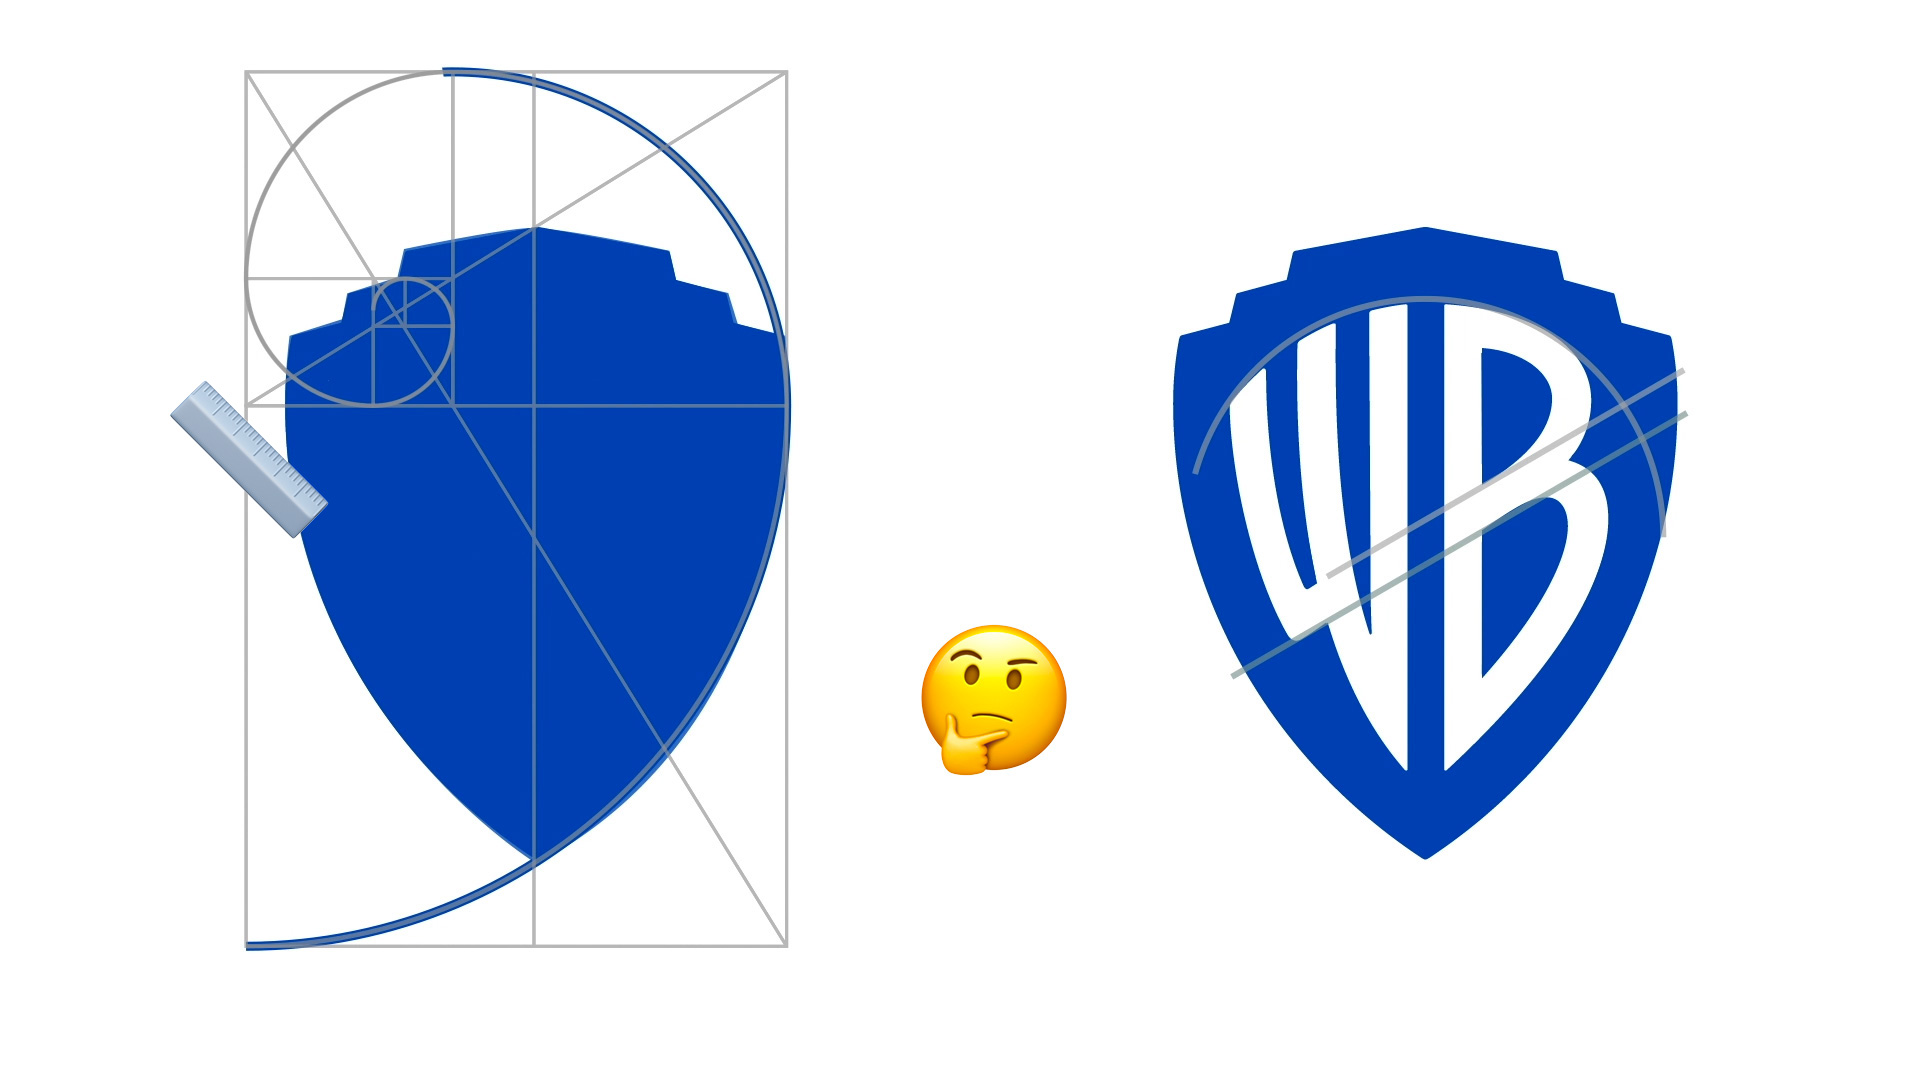 New Logo and Identity for Warner Bros. by Pentagram